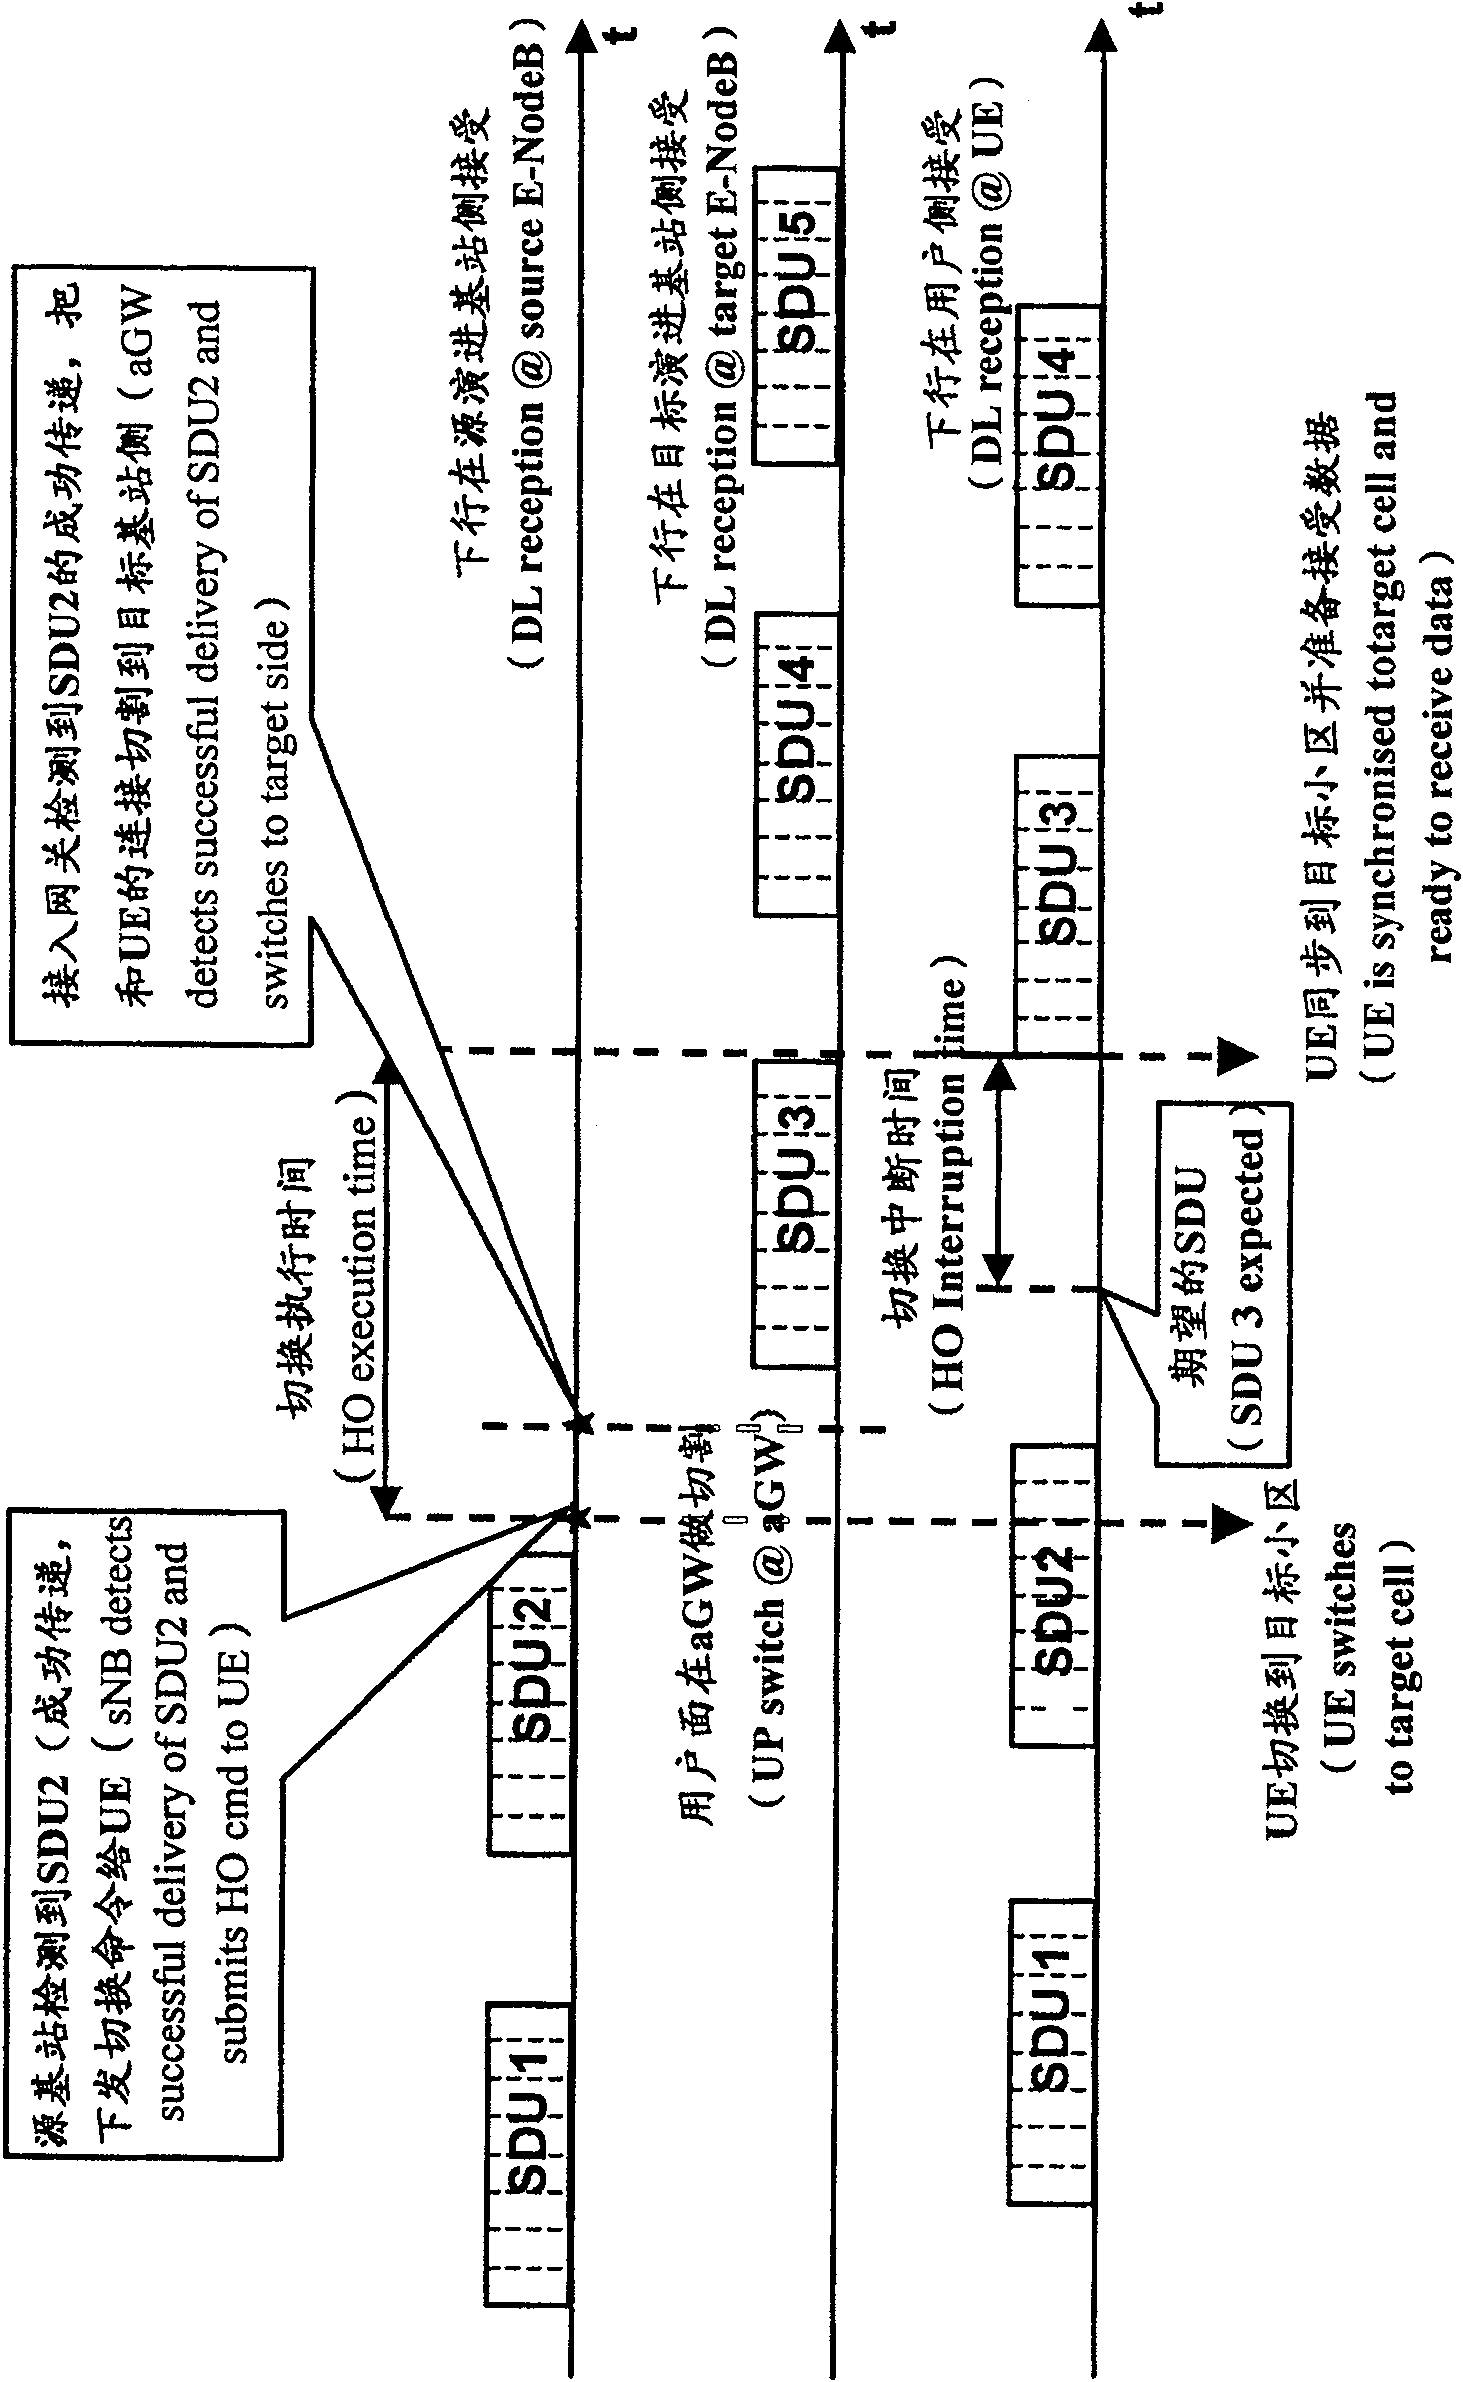 Gradual network system and data transmission method when the system switchover